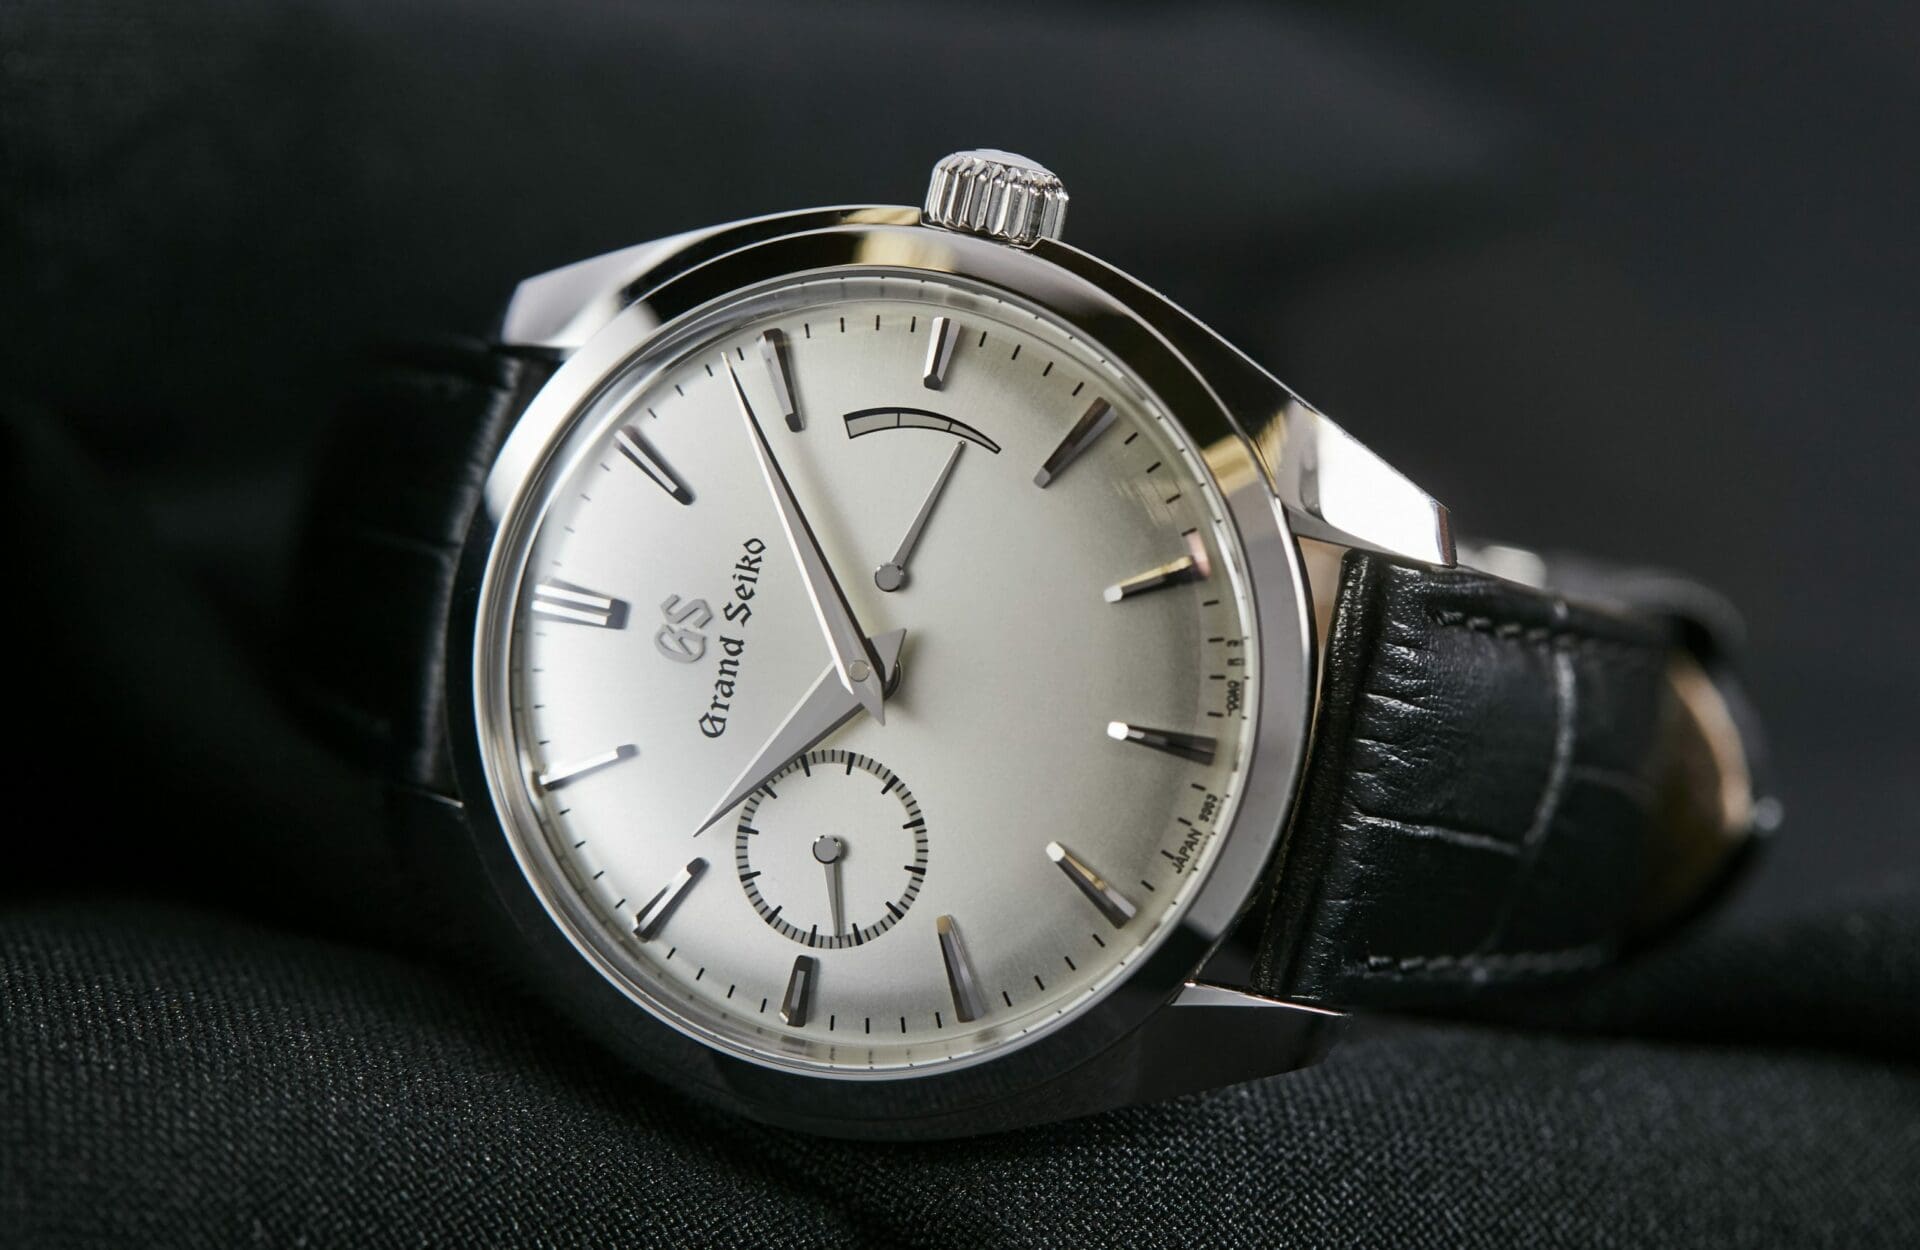 HANDS-ON: Is this Grand Seiko Elegance SBGK007 a perfect dress watch?